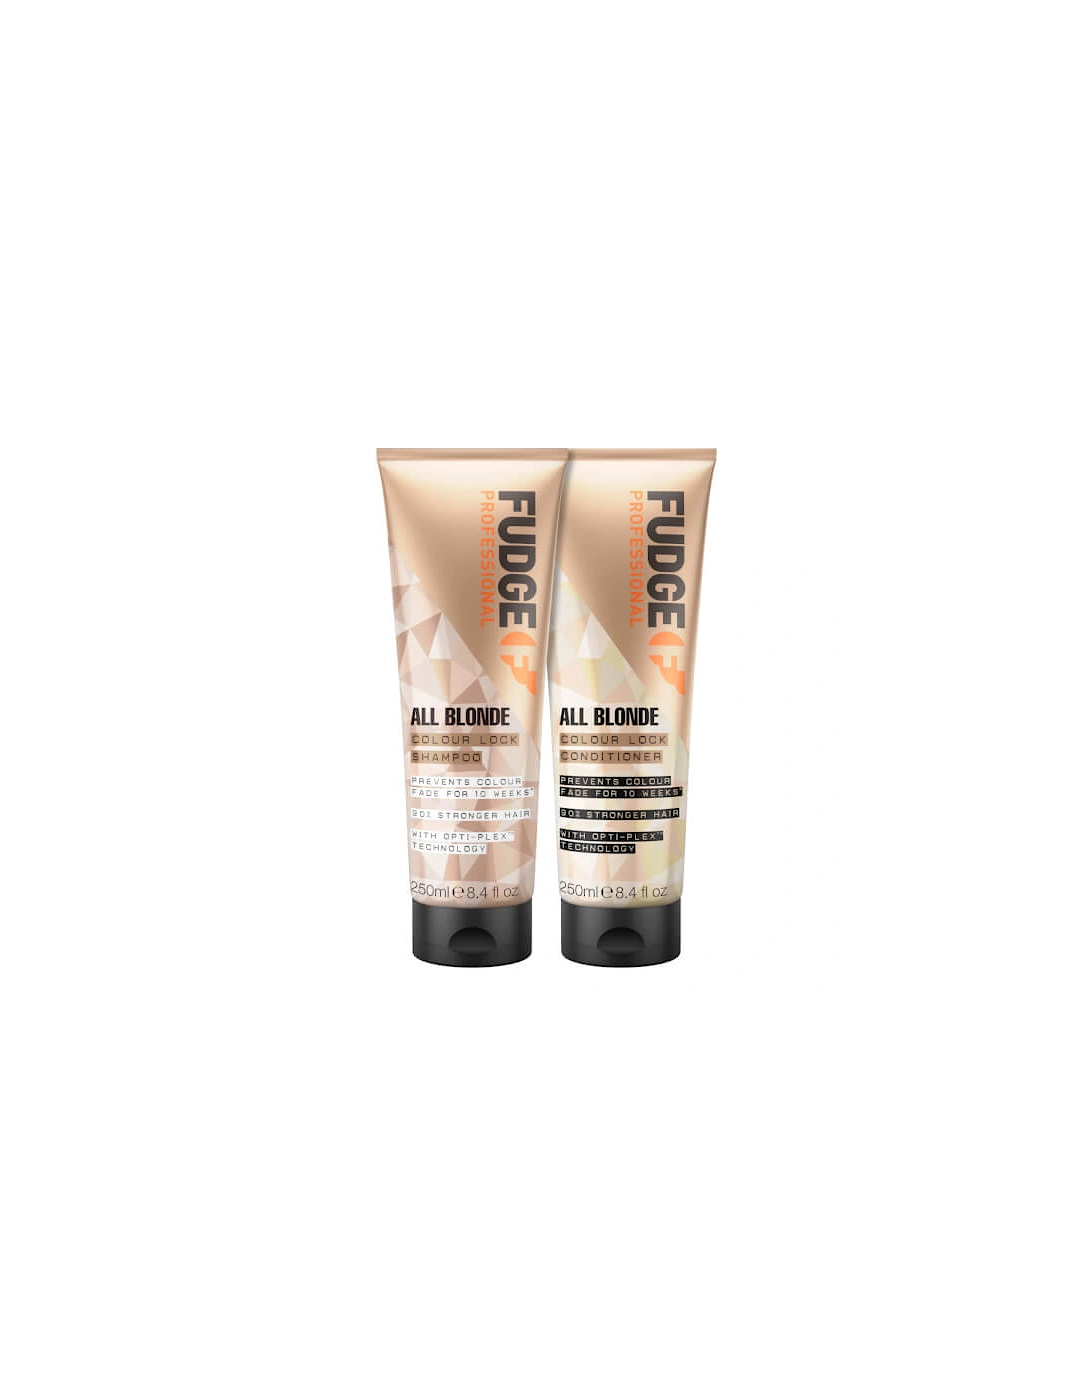 Professional All Blonde Colour Lock Shampoo and Conditioner Bundle 250ml, 2 of 1